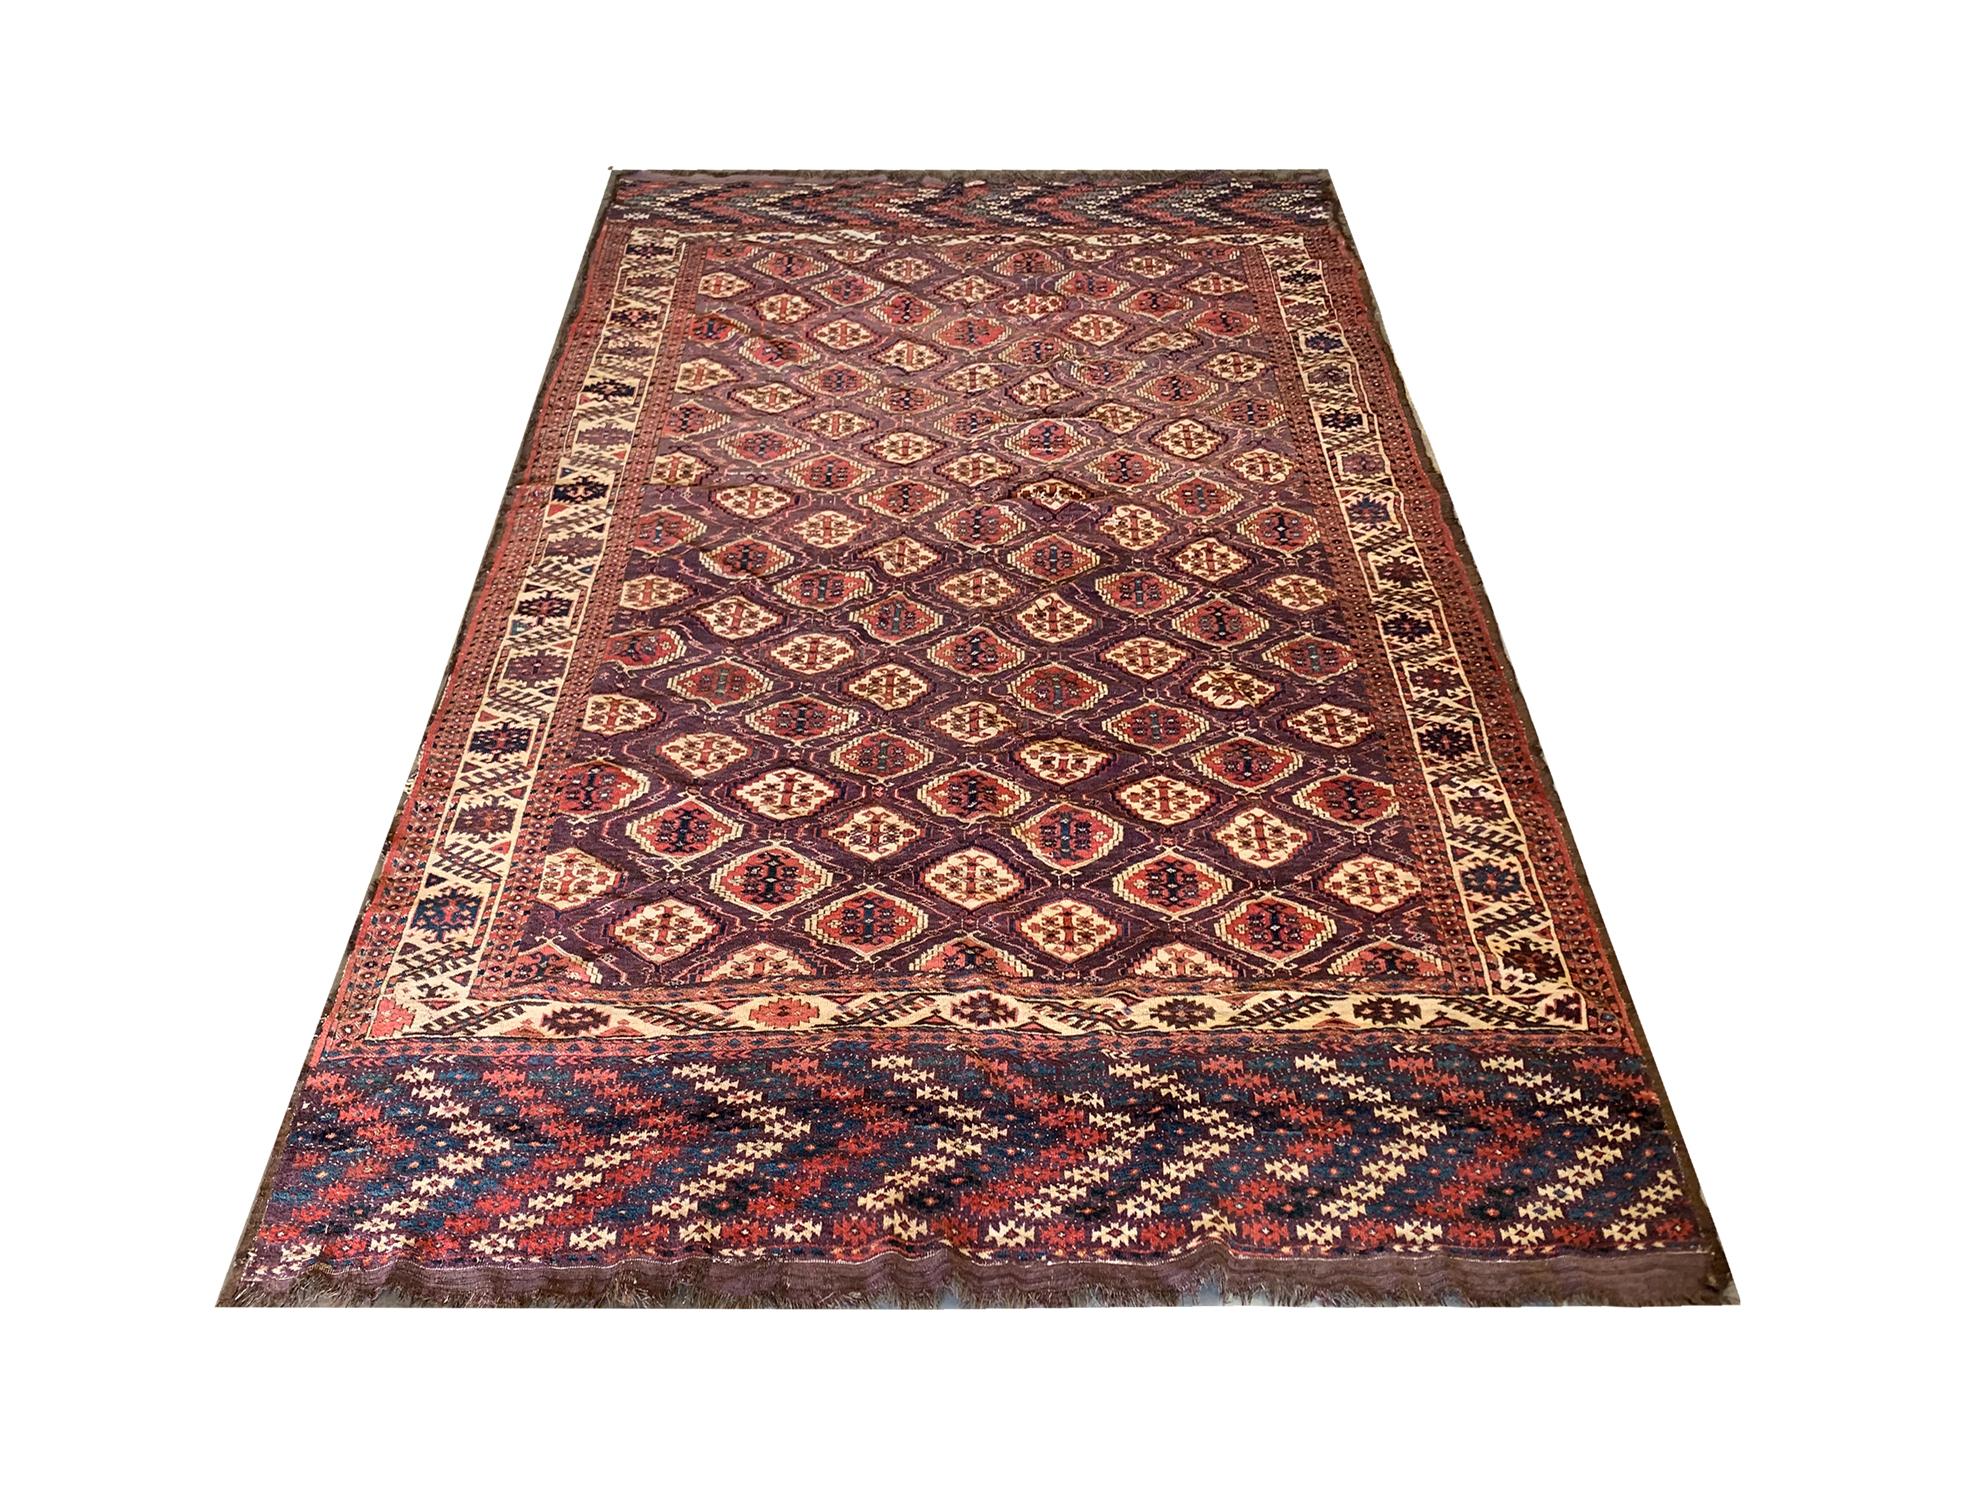 This antique wool carpet was woven by hand in Afghanistan in the 1890s by Turkmen people. The central design has been woven on a brown-red background with a repeating pattern geometric design made up of accents including cream and red. Sophisticated